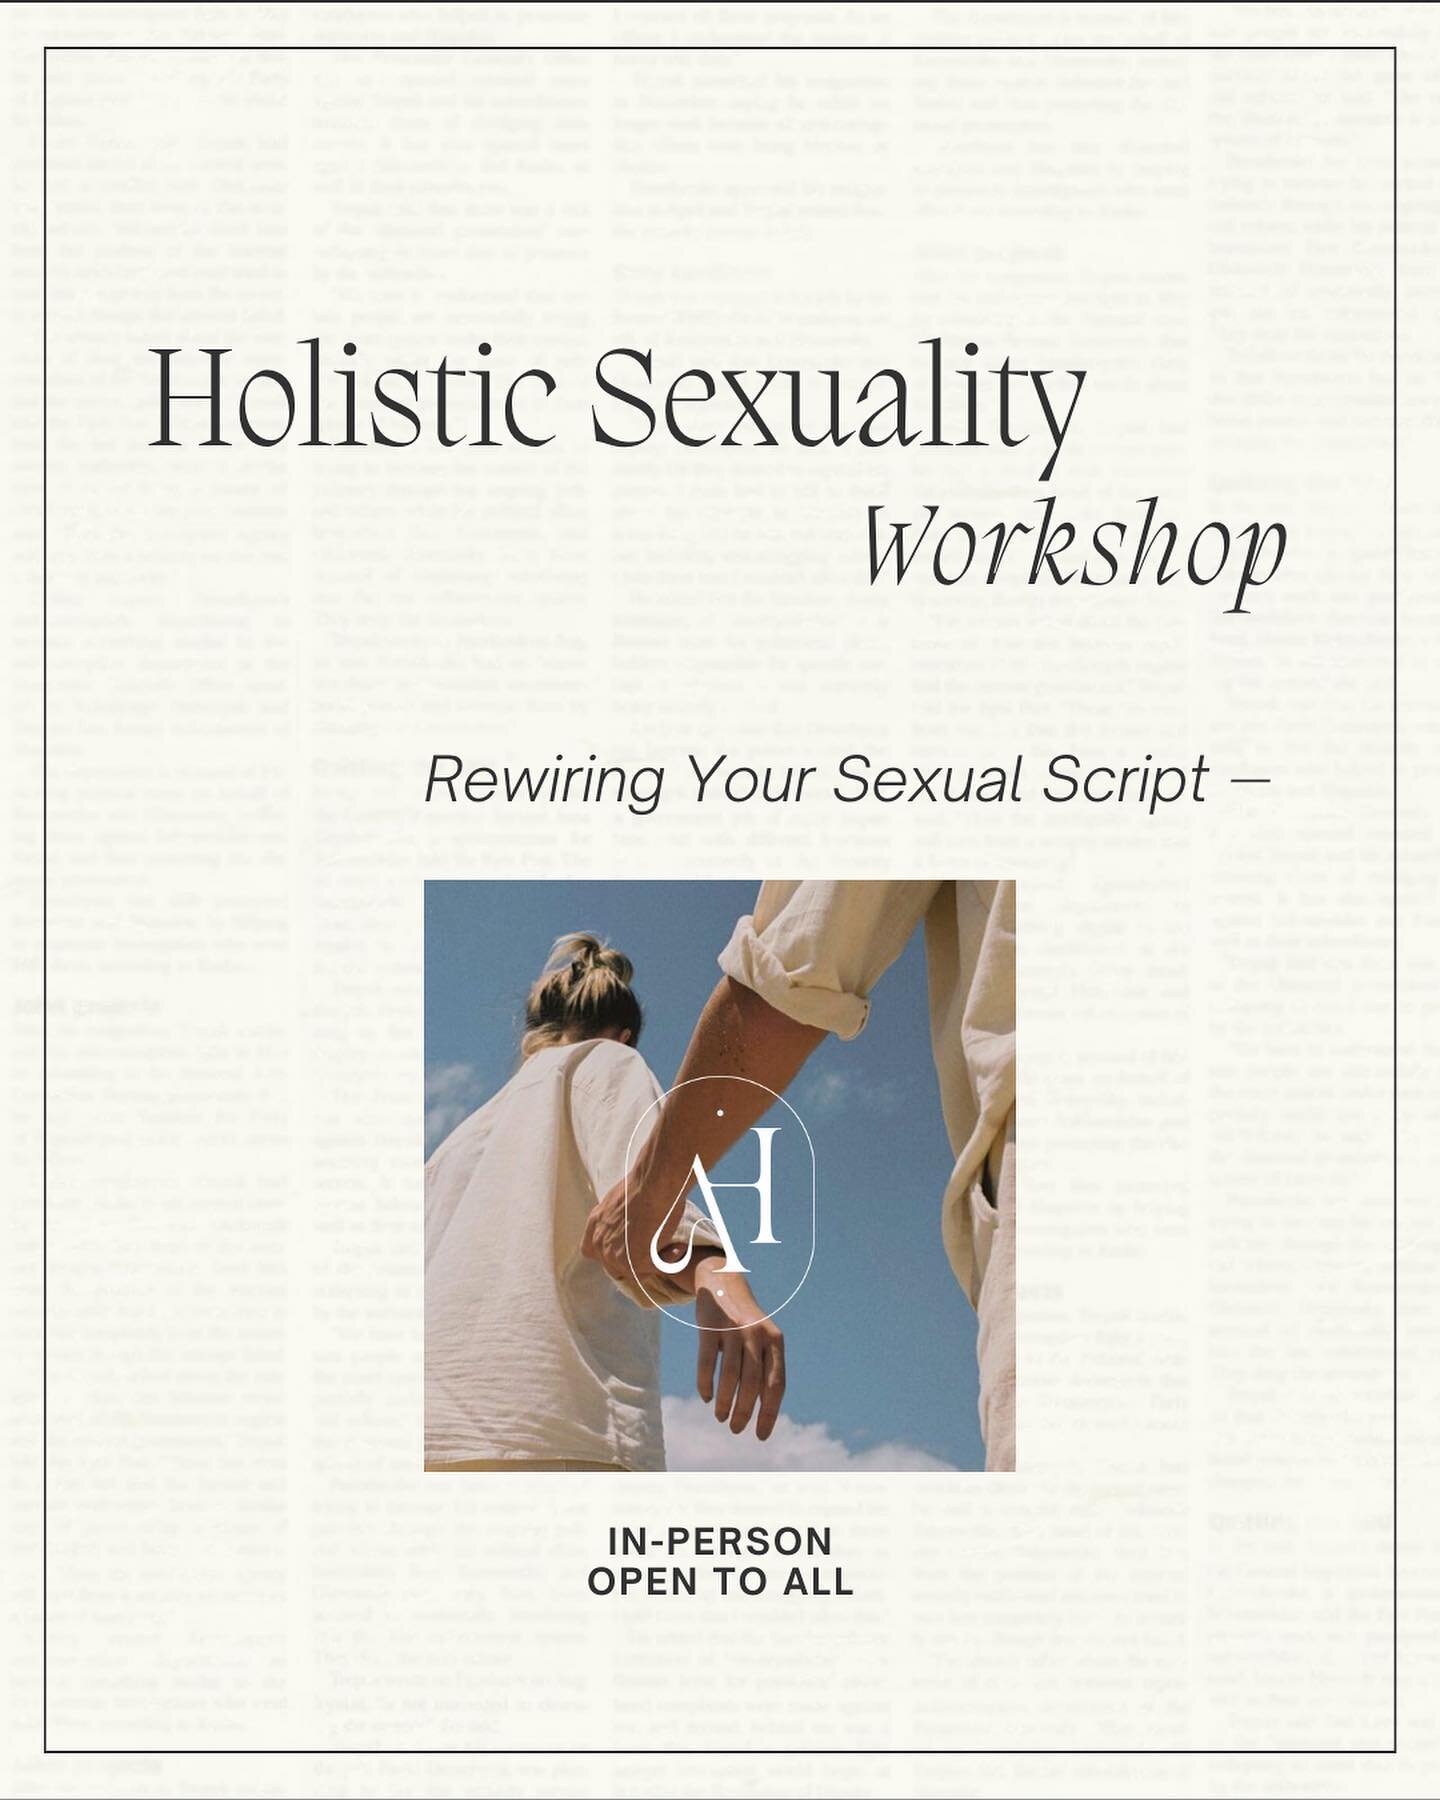 〰️ Holistic Sexuality Workshop 〰️

Mes ch&eacute;ris, I'm bringing back this workshop, now held in my new space in Bondi Beach.

In this workshop, you'll learn about sexual desire functioning and the impact of societal conditioning on your sexual exp